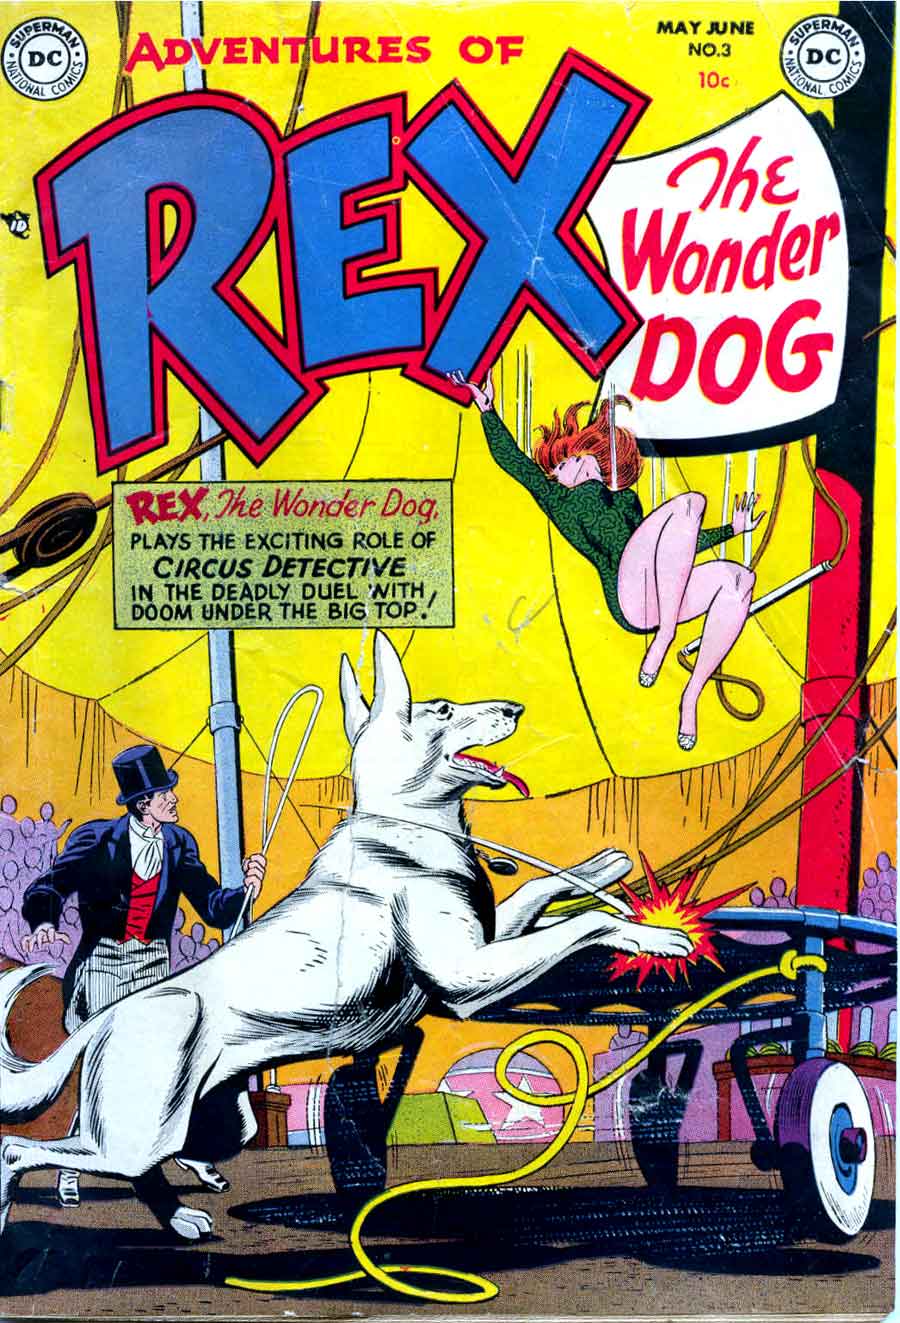 Adventures of Rex the Wonder Dog v1 #3 dc 1950s golden age comic book cover art by Gil Kane